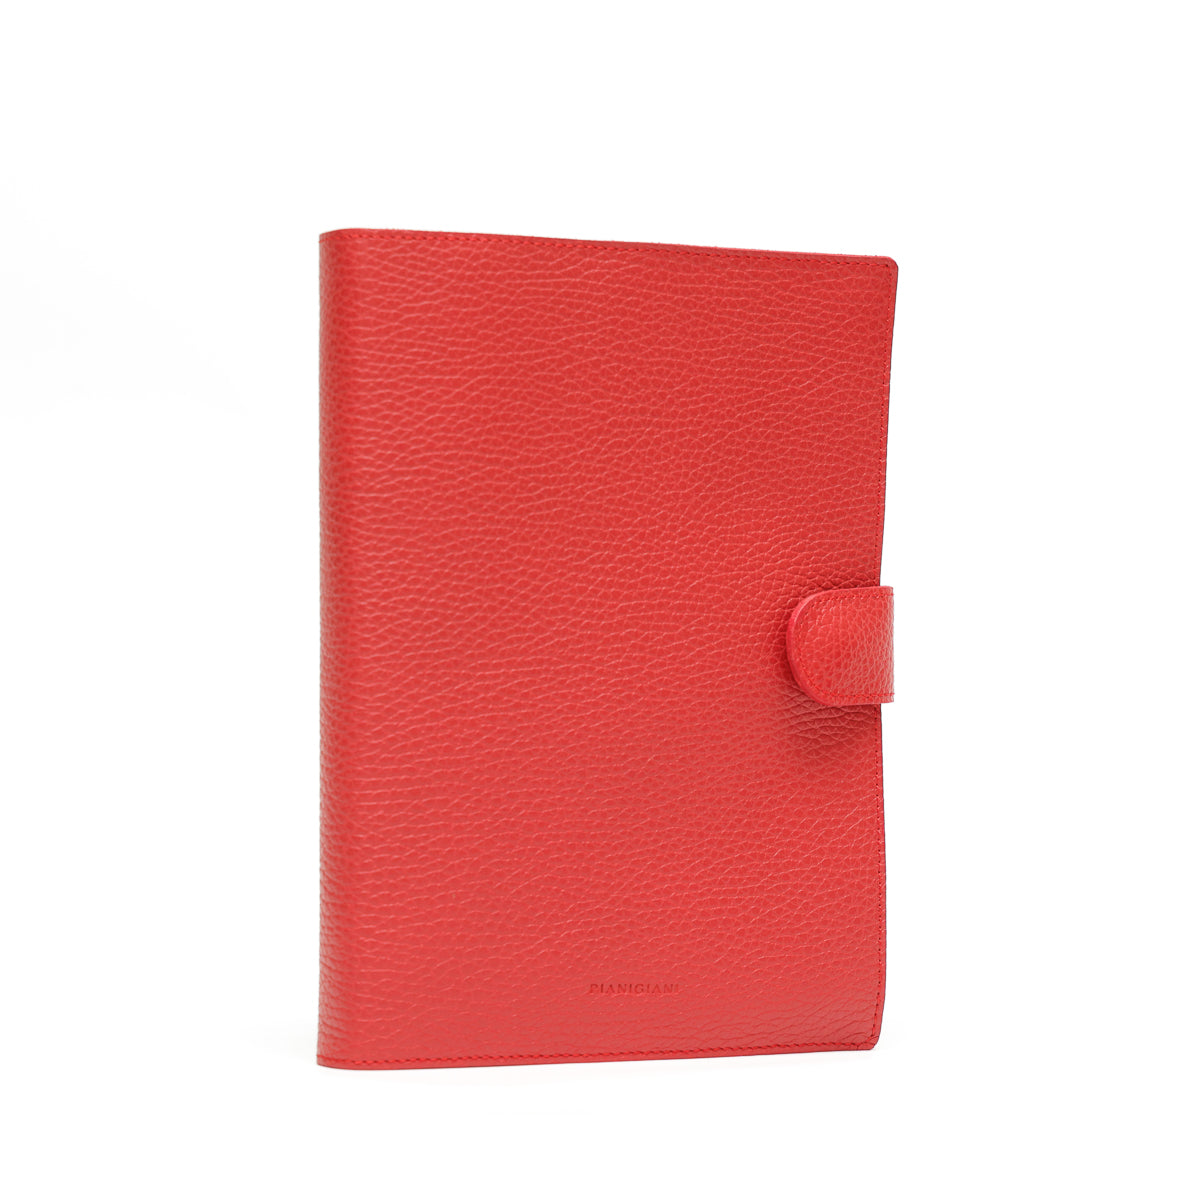 Large Red Agenda - red / pebbled leather